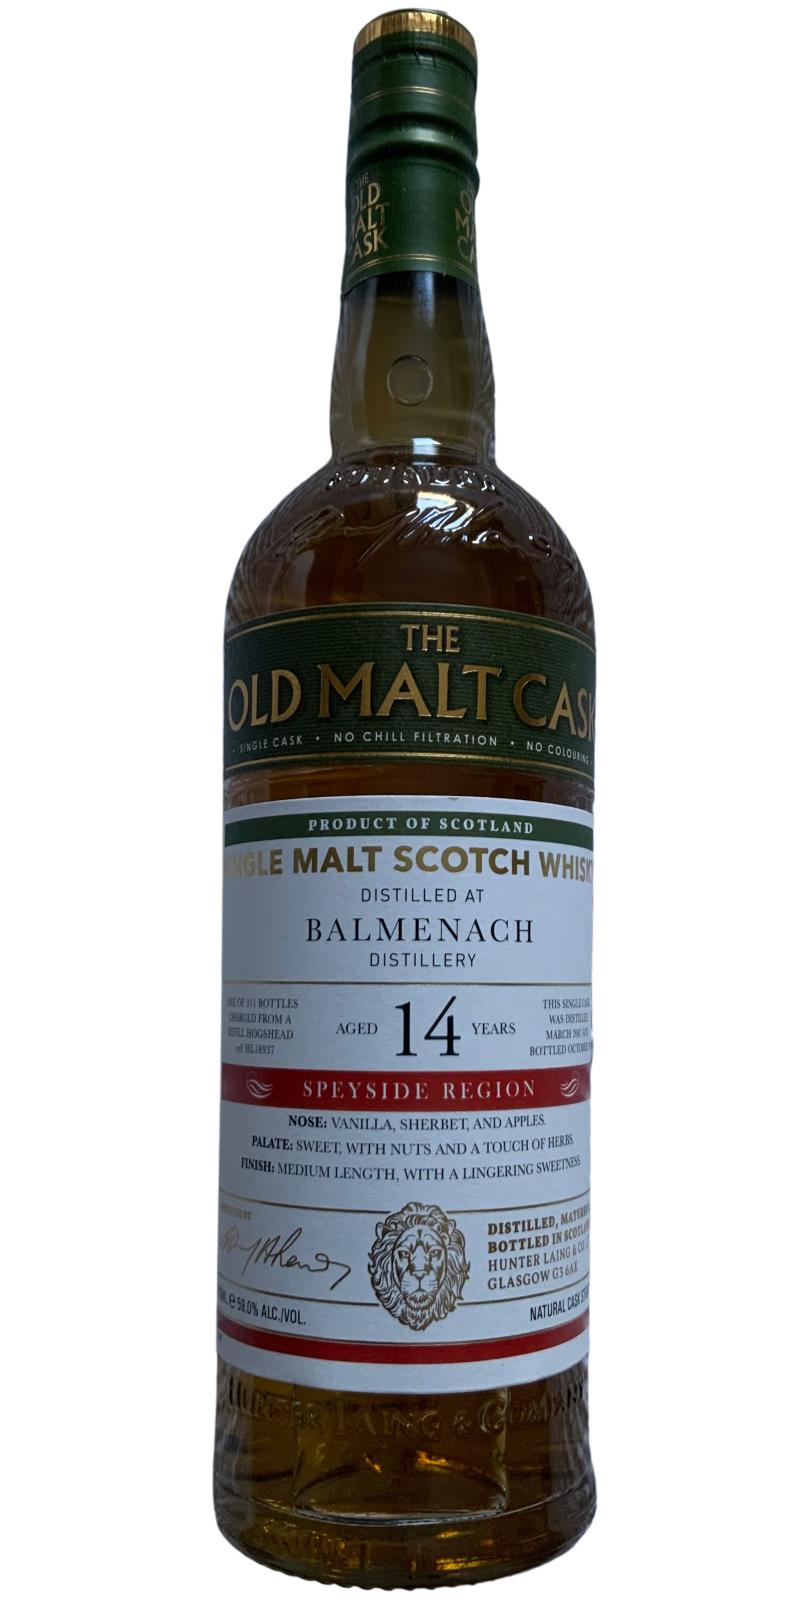 Balmenach 2007 HL The Old Malt Cask Refill hogshead Wine and Beyond. Spirits Beer and more 59% 700ml